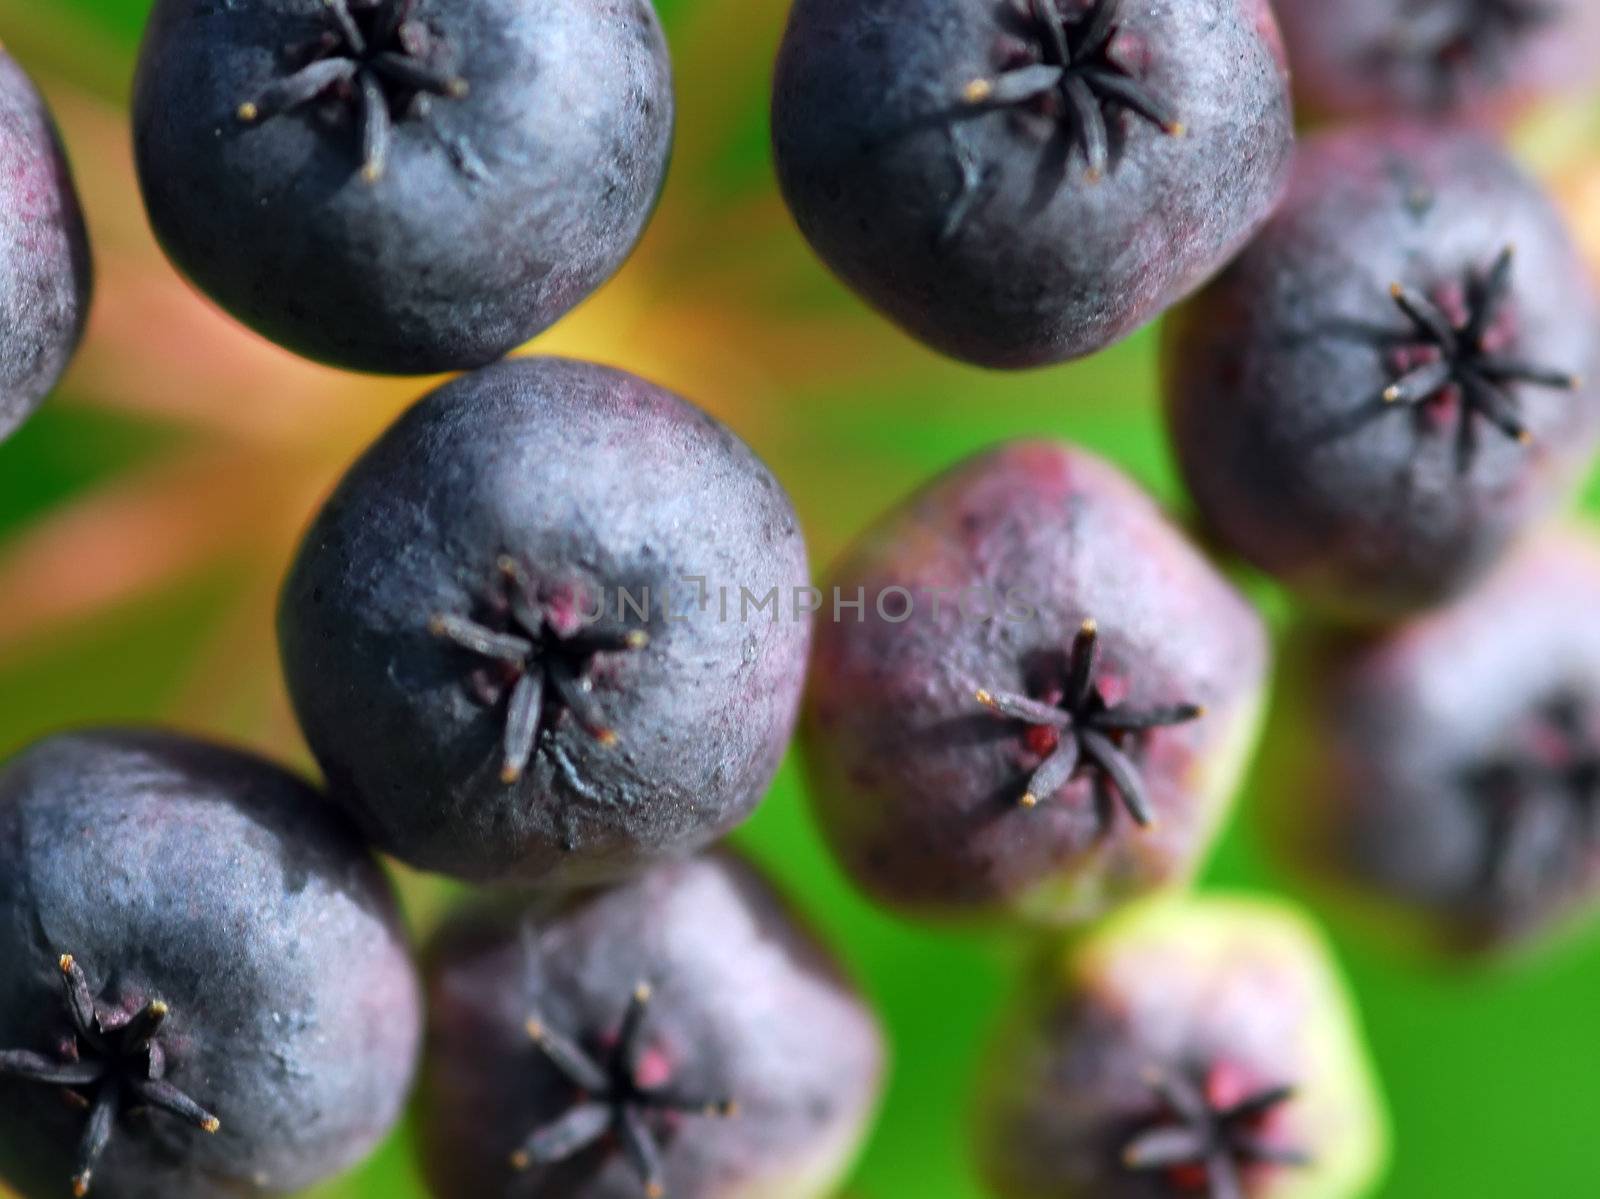 Closeup of some small berries that looks like blueberries